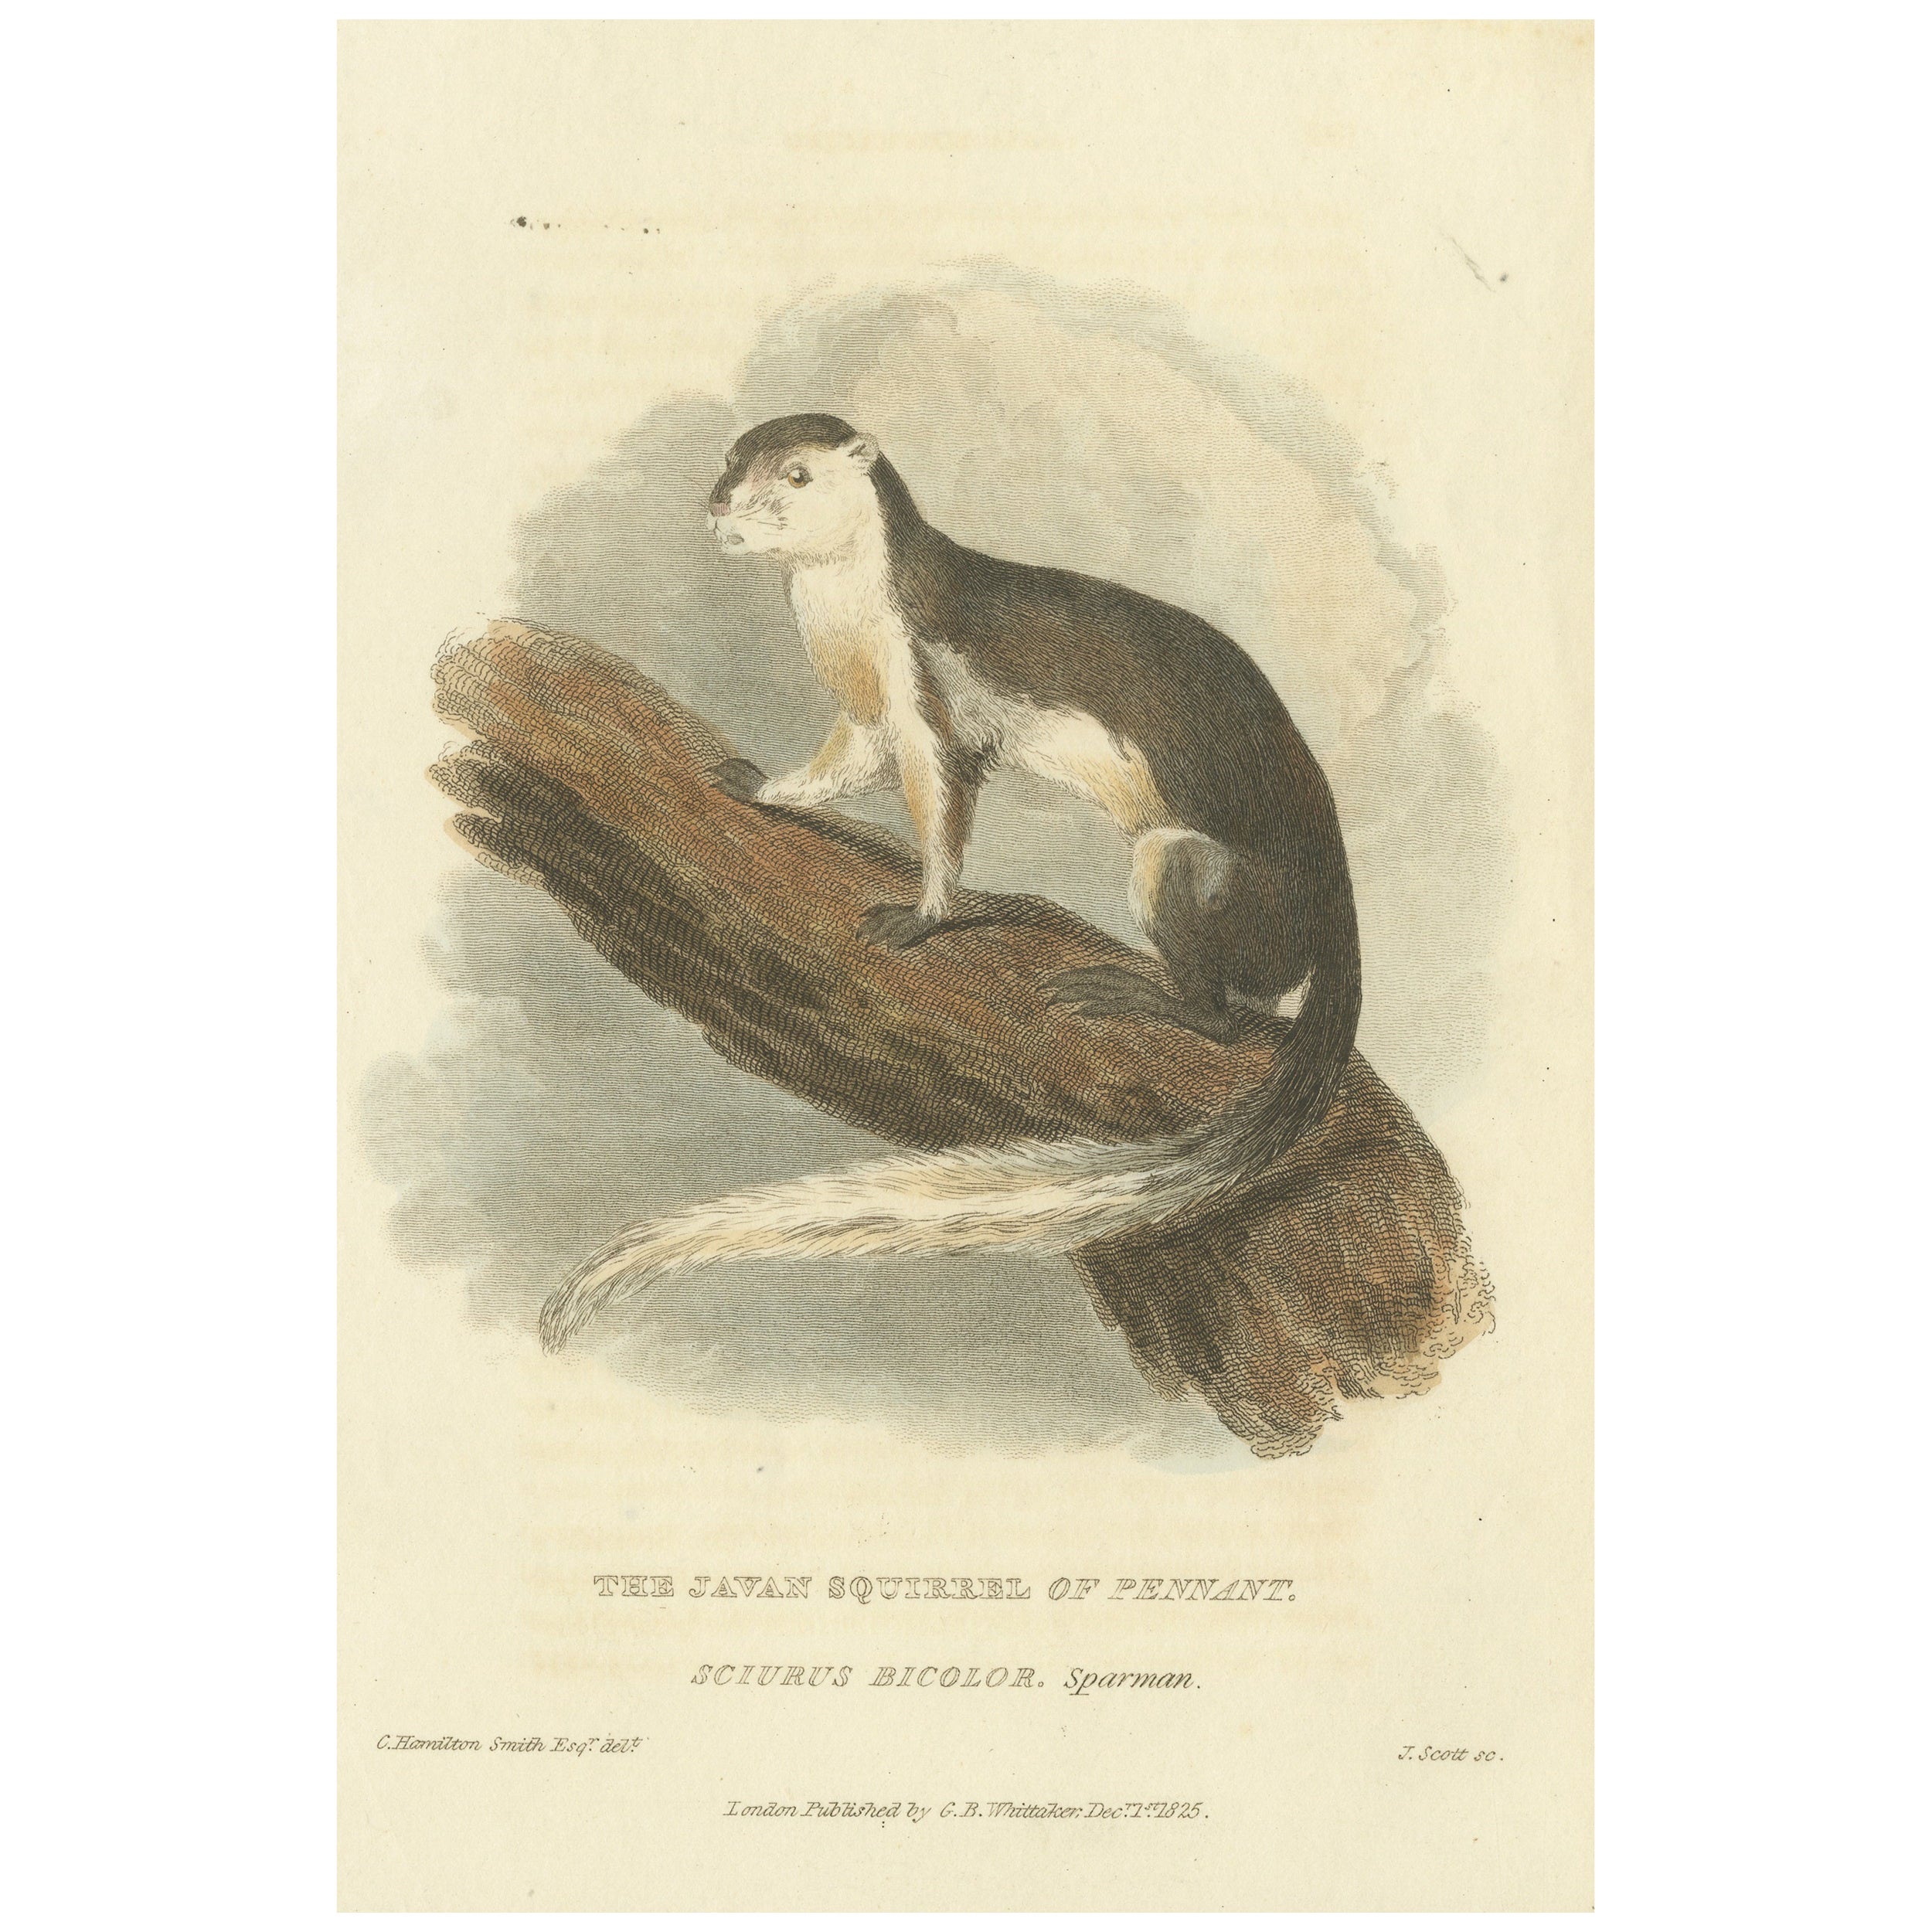 Antique Print with Hand Coloring of a Black Giant Squirrel or Javan Squirrel